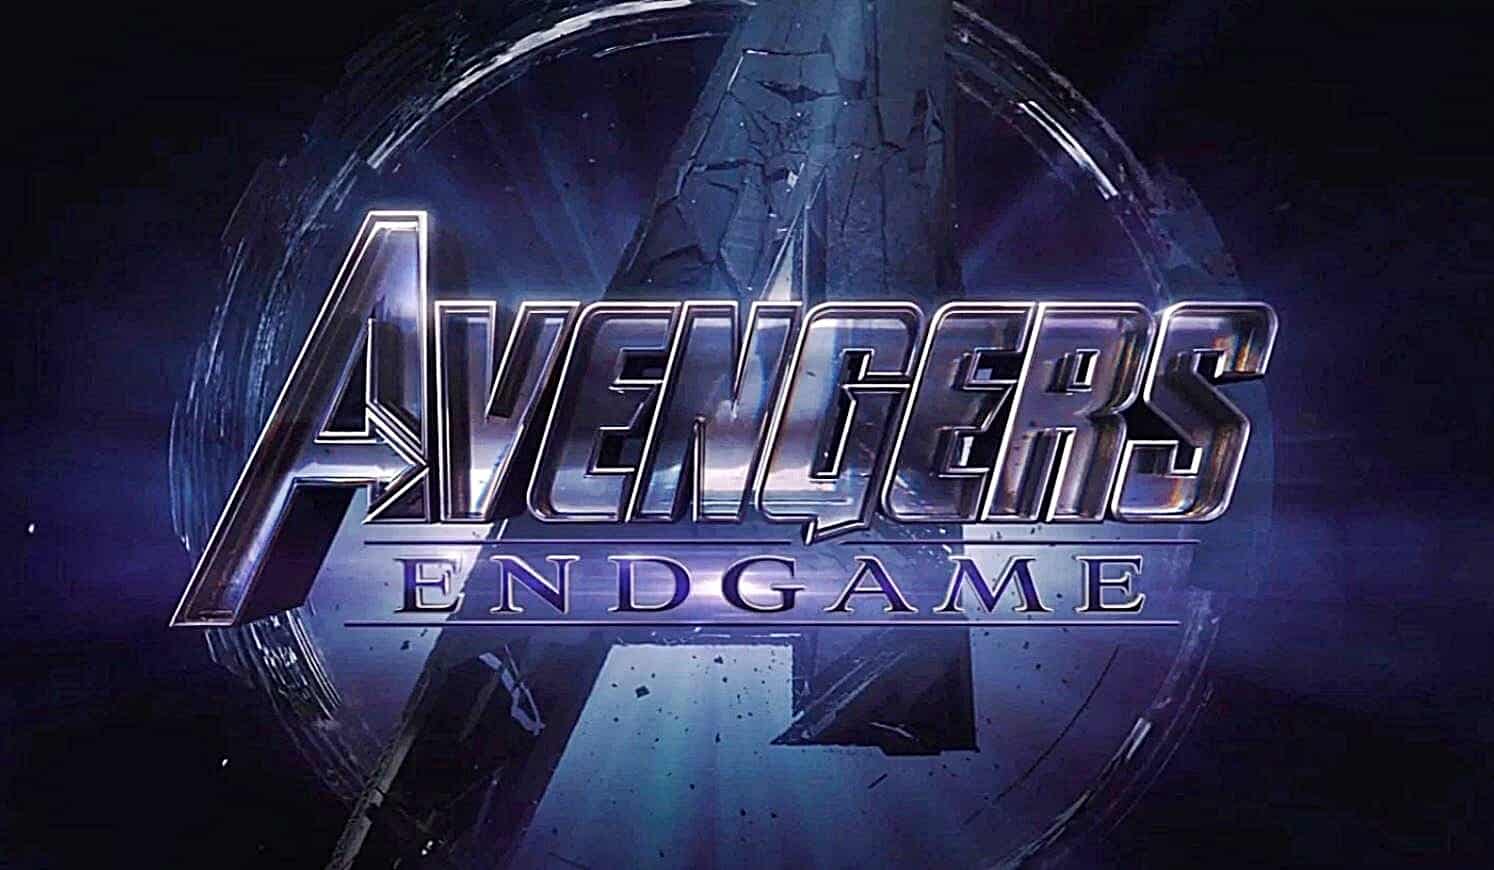 Why The Russo Brothers Lied About 'Avengers: Endgame' Title